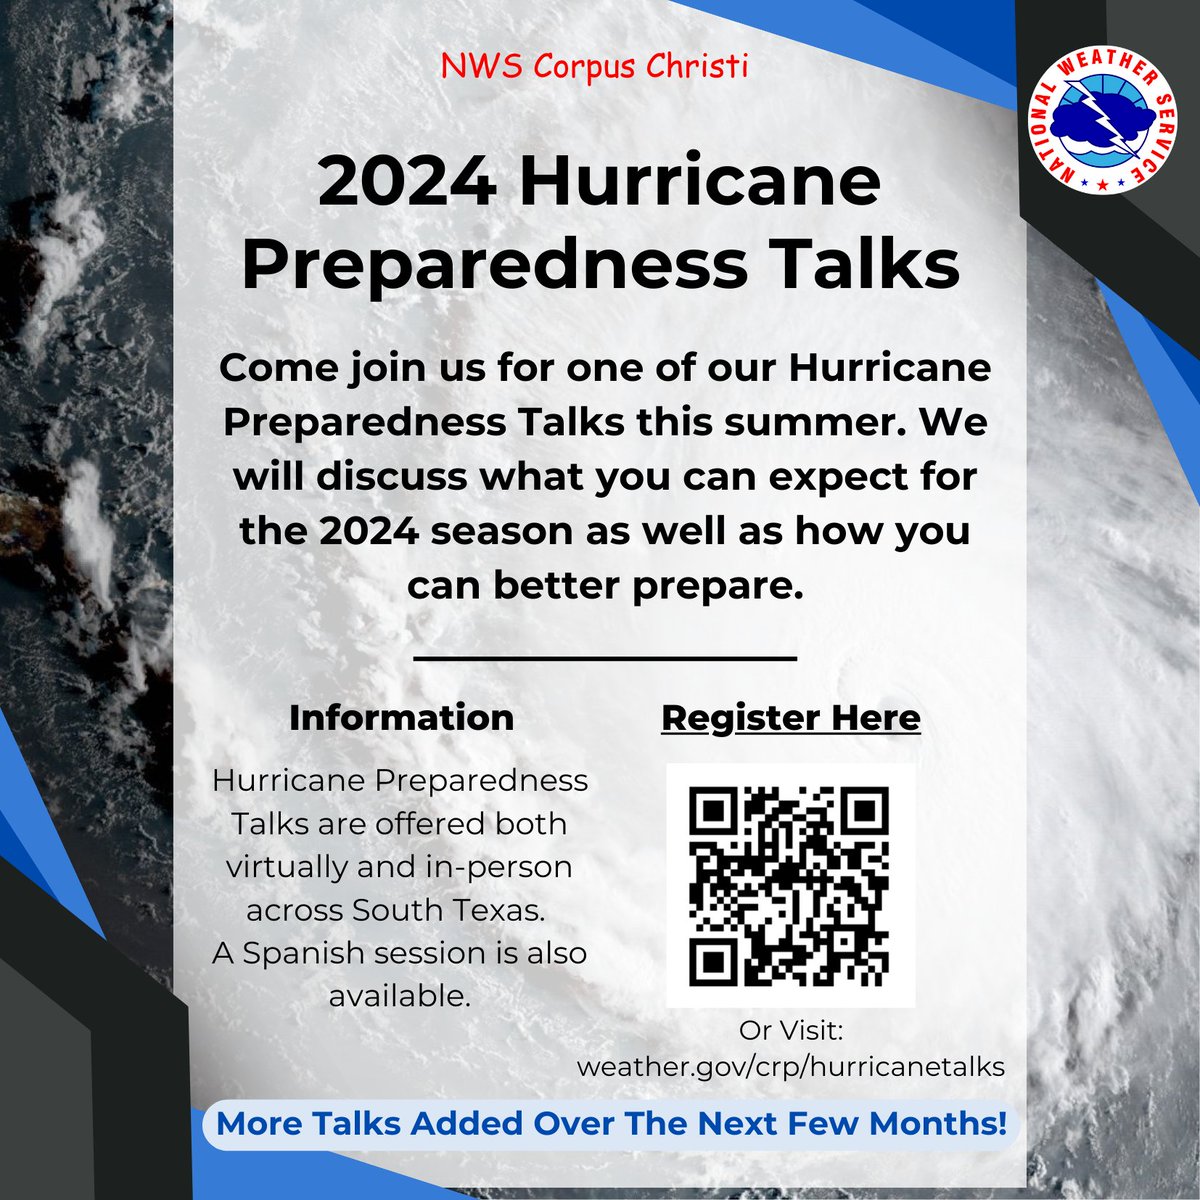 It's that time of the year. Come join us for one of our Hurricane Preparedness Talks this summer. We plan on adding additional talks over the next few months so continue to check back to see which date works for you! To register, visit: weather.gov/crp/hurricanet…